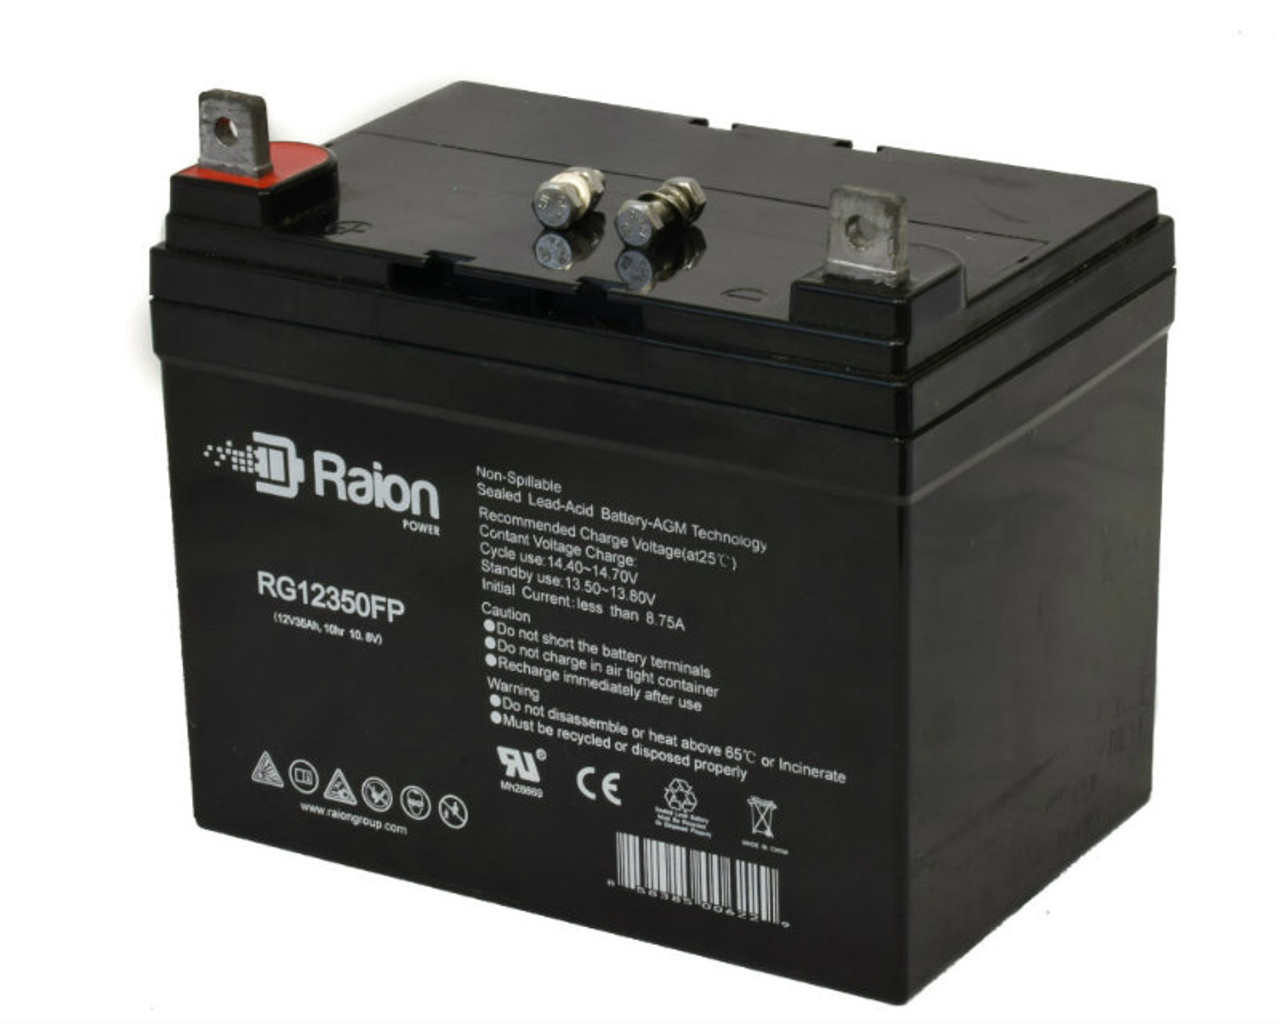 Raion Power Replacement 12V 35Ah RG12350FP Battery for Dixon 4424